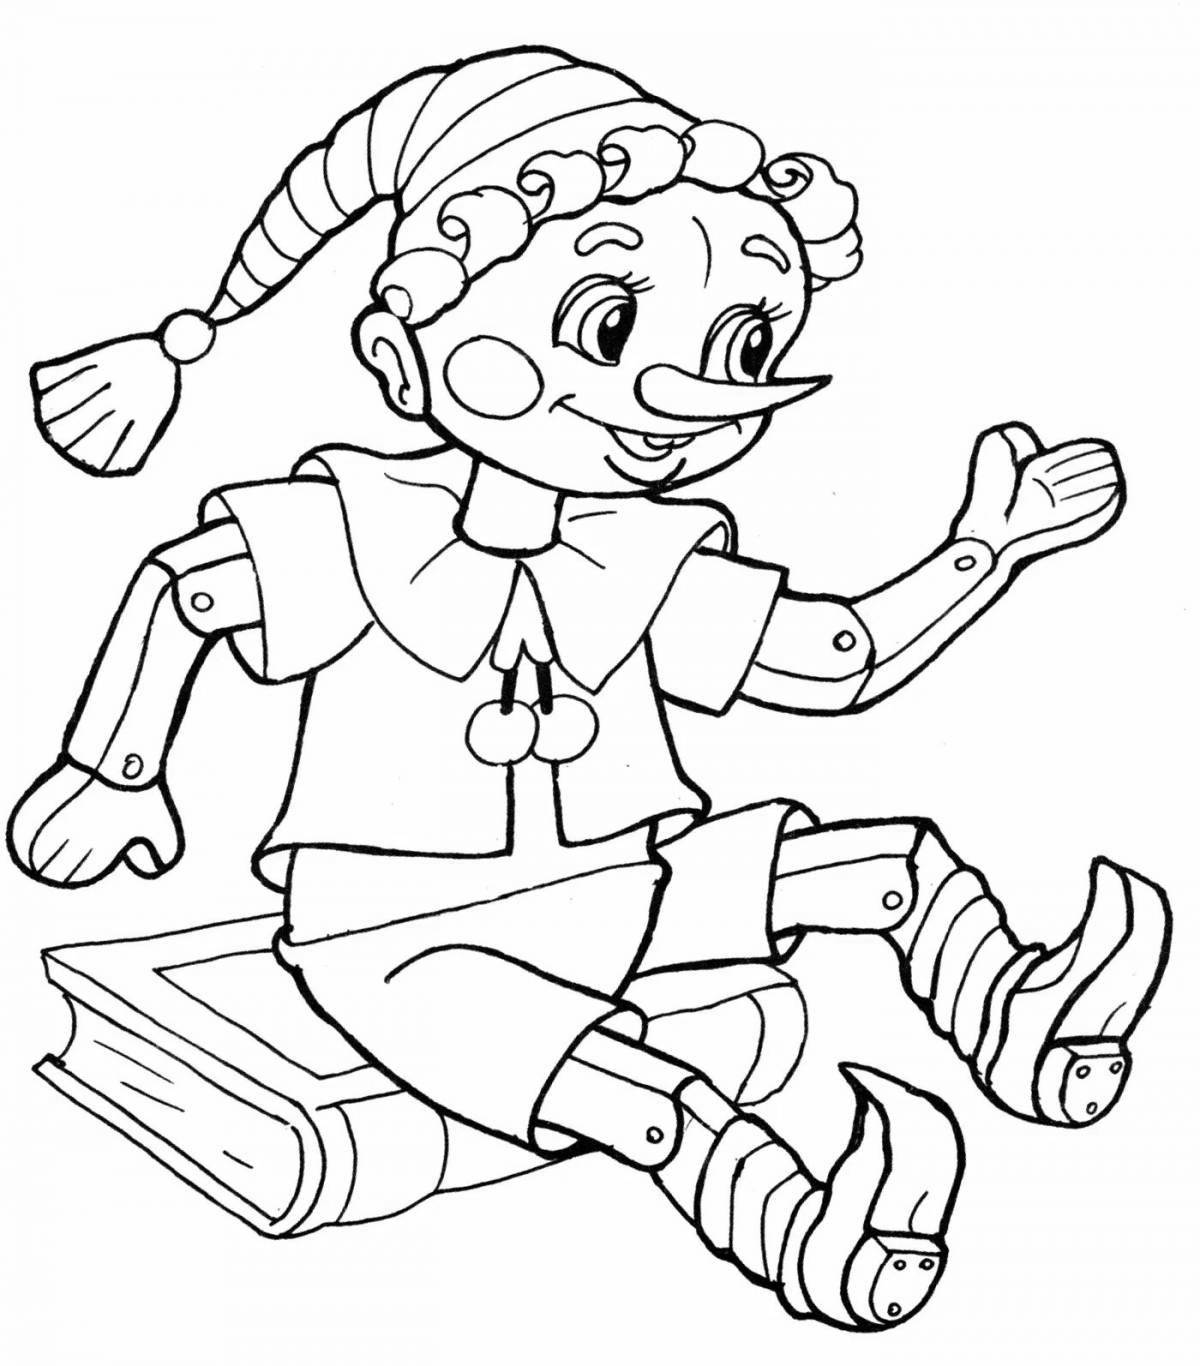 Magic coloring book heroes of fairy tales